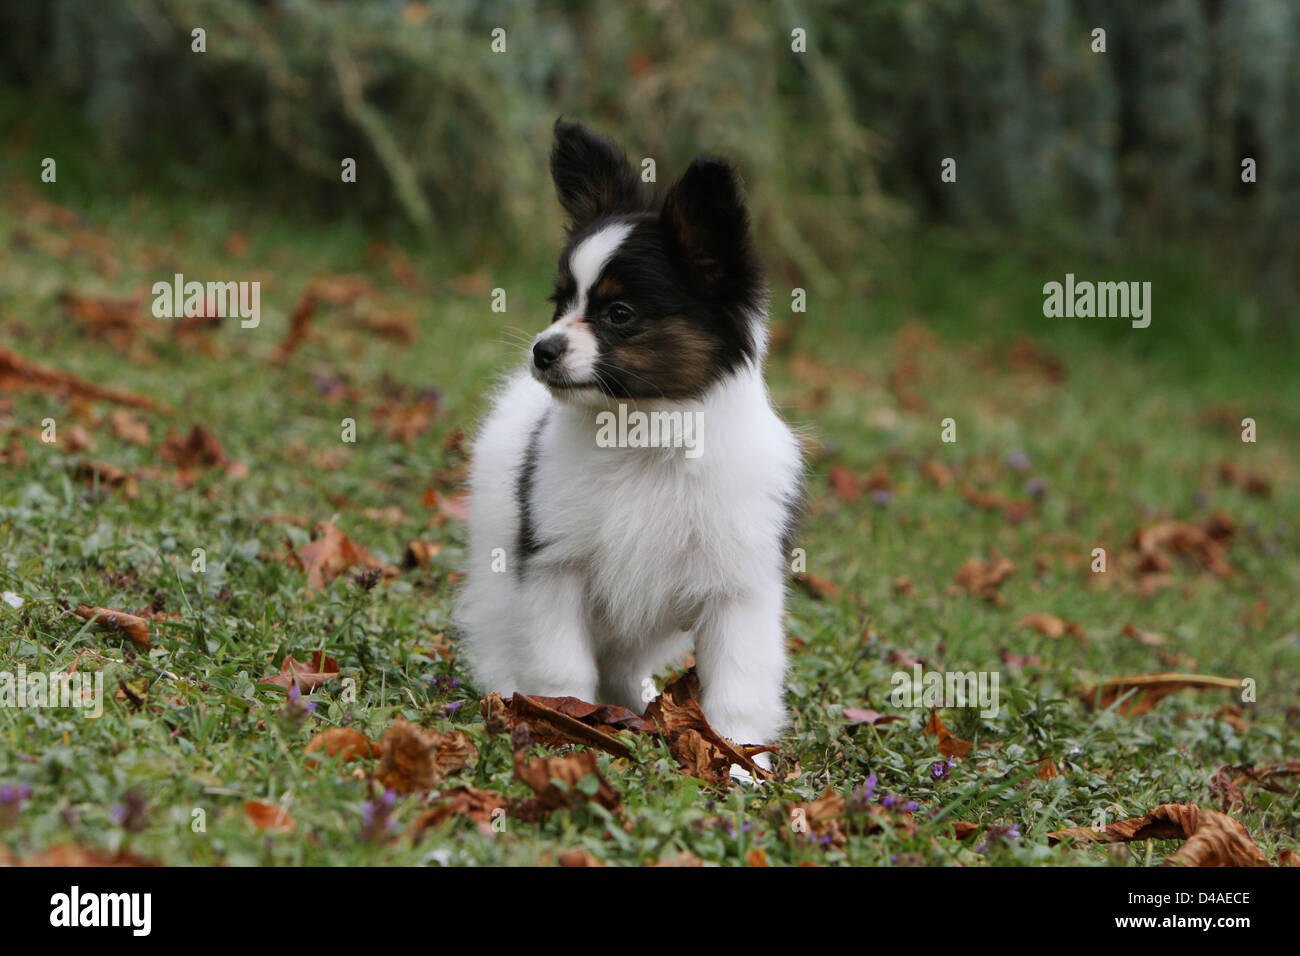 Dog Papillon / Continental Toy Spaniel Butterfly Dog  puppy standing in a park Stock Photo